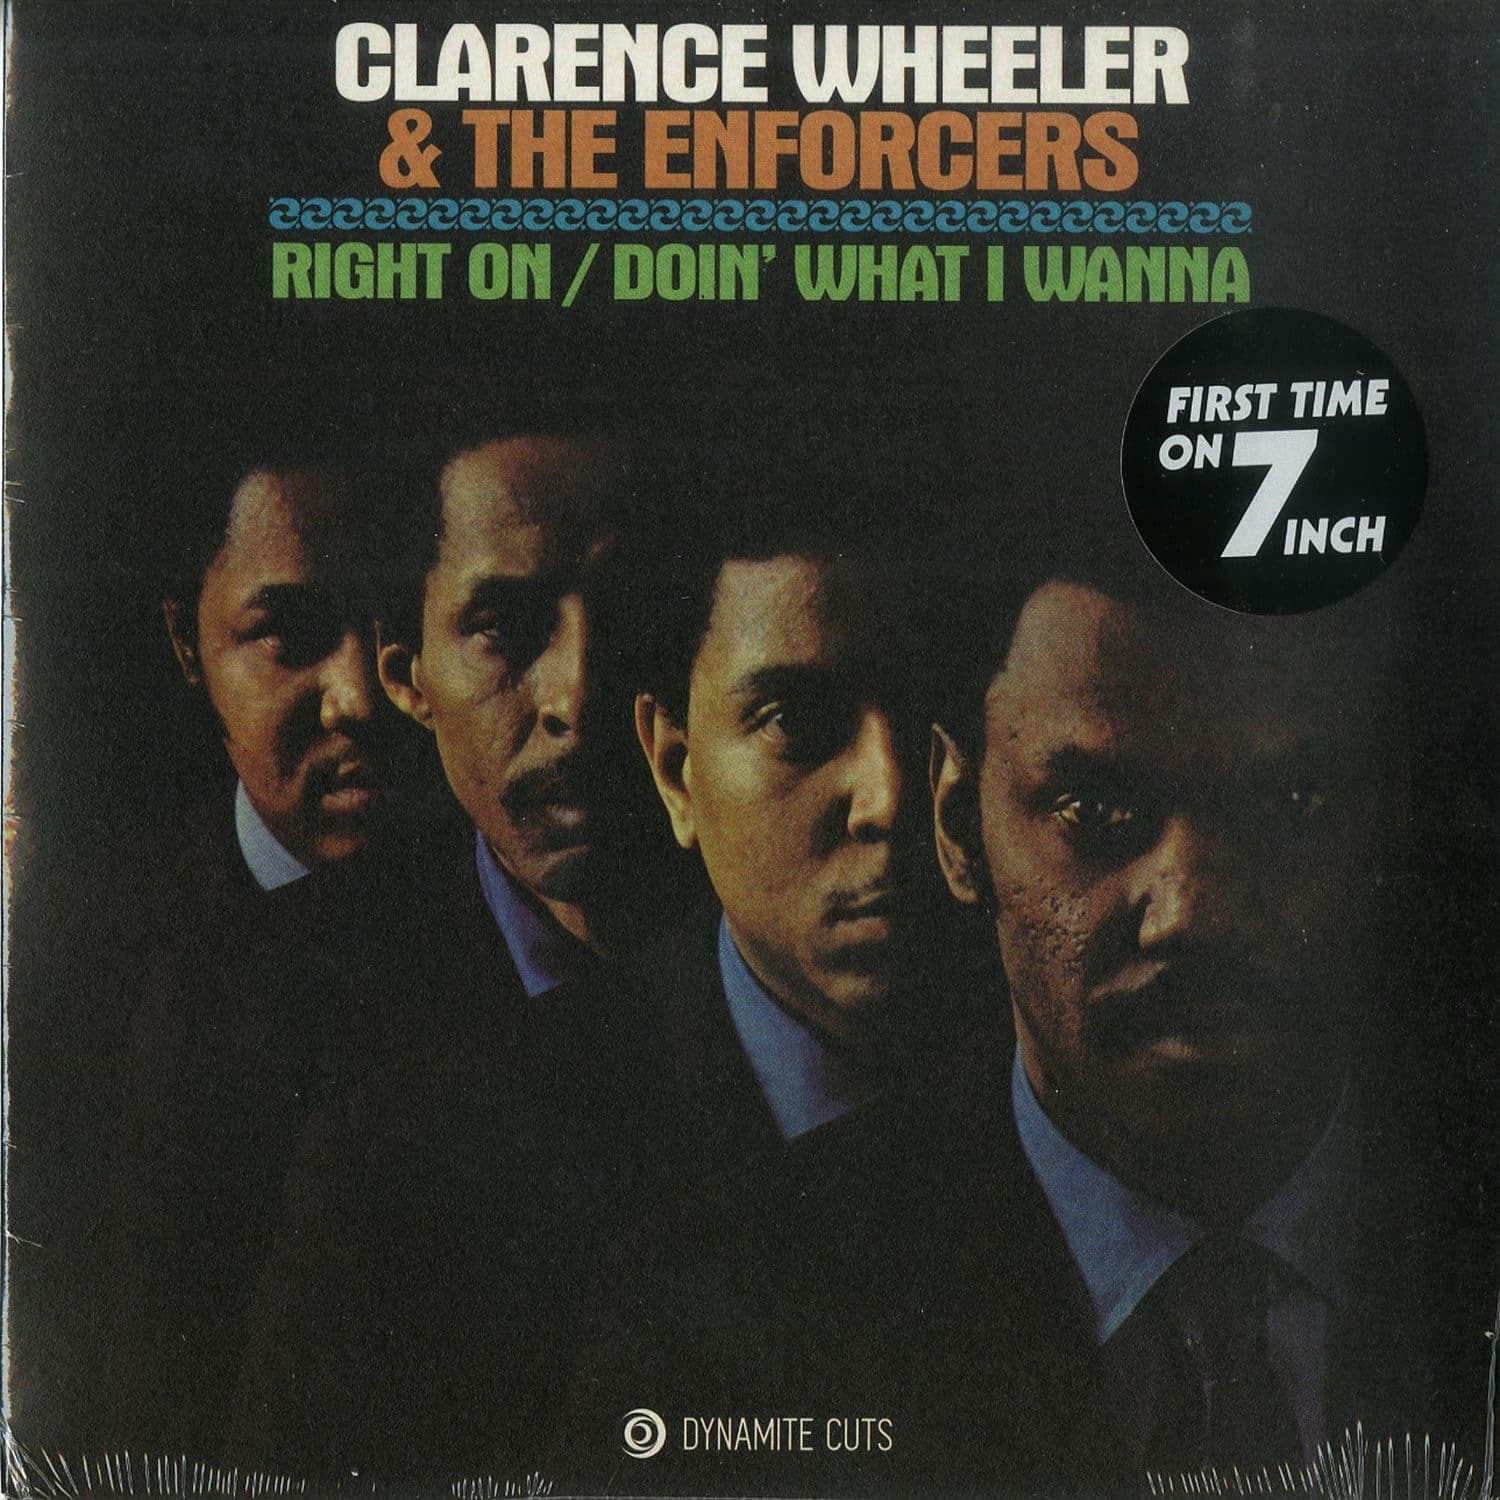 Clarence Wheeler & The Enforcers - RIGHT ON / DOIN WHAT I WANNA 